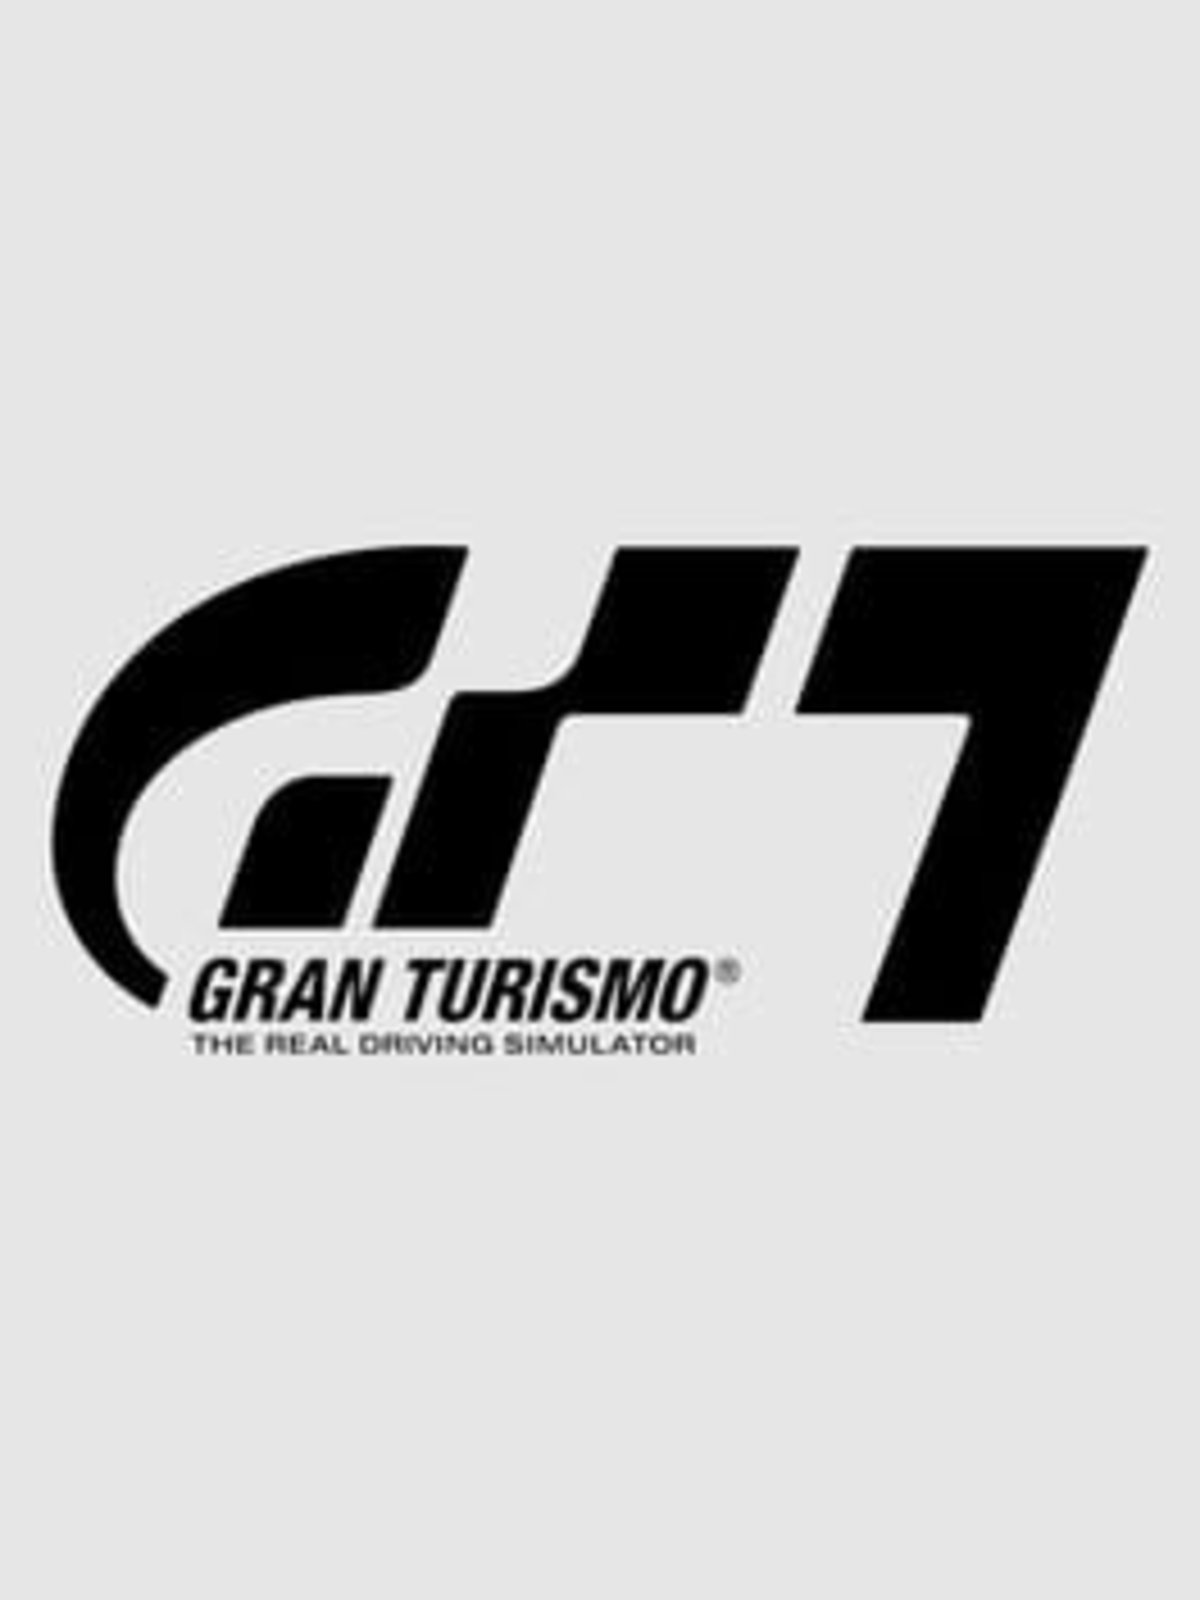 Gran Turismo 7 shown in two new videos to give more details of the circuits and customization